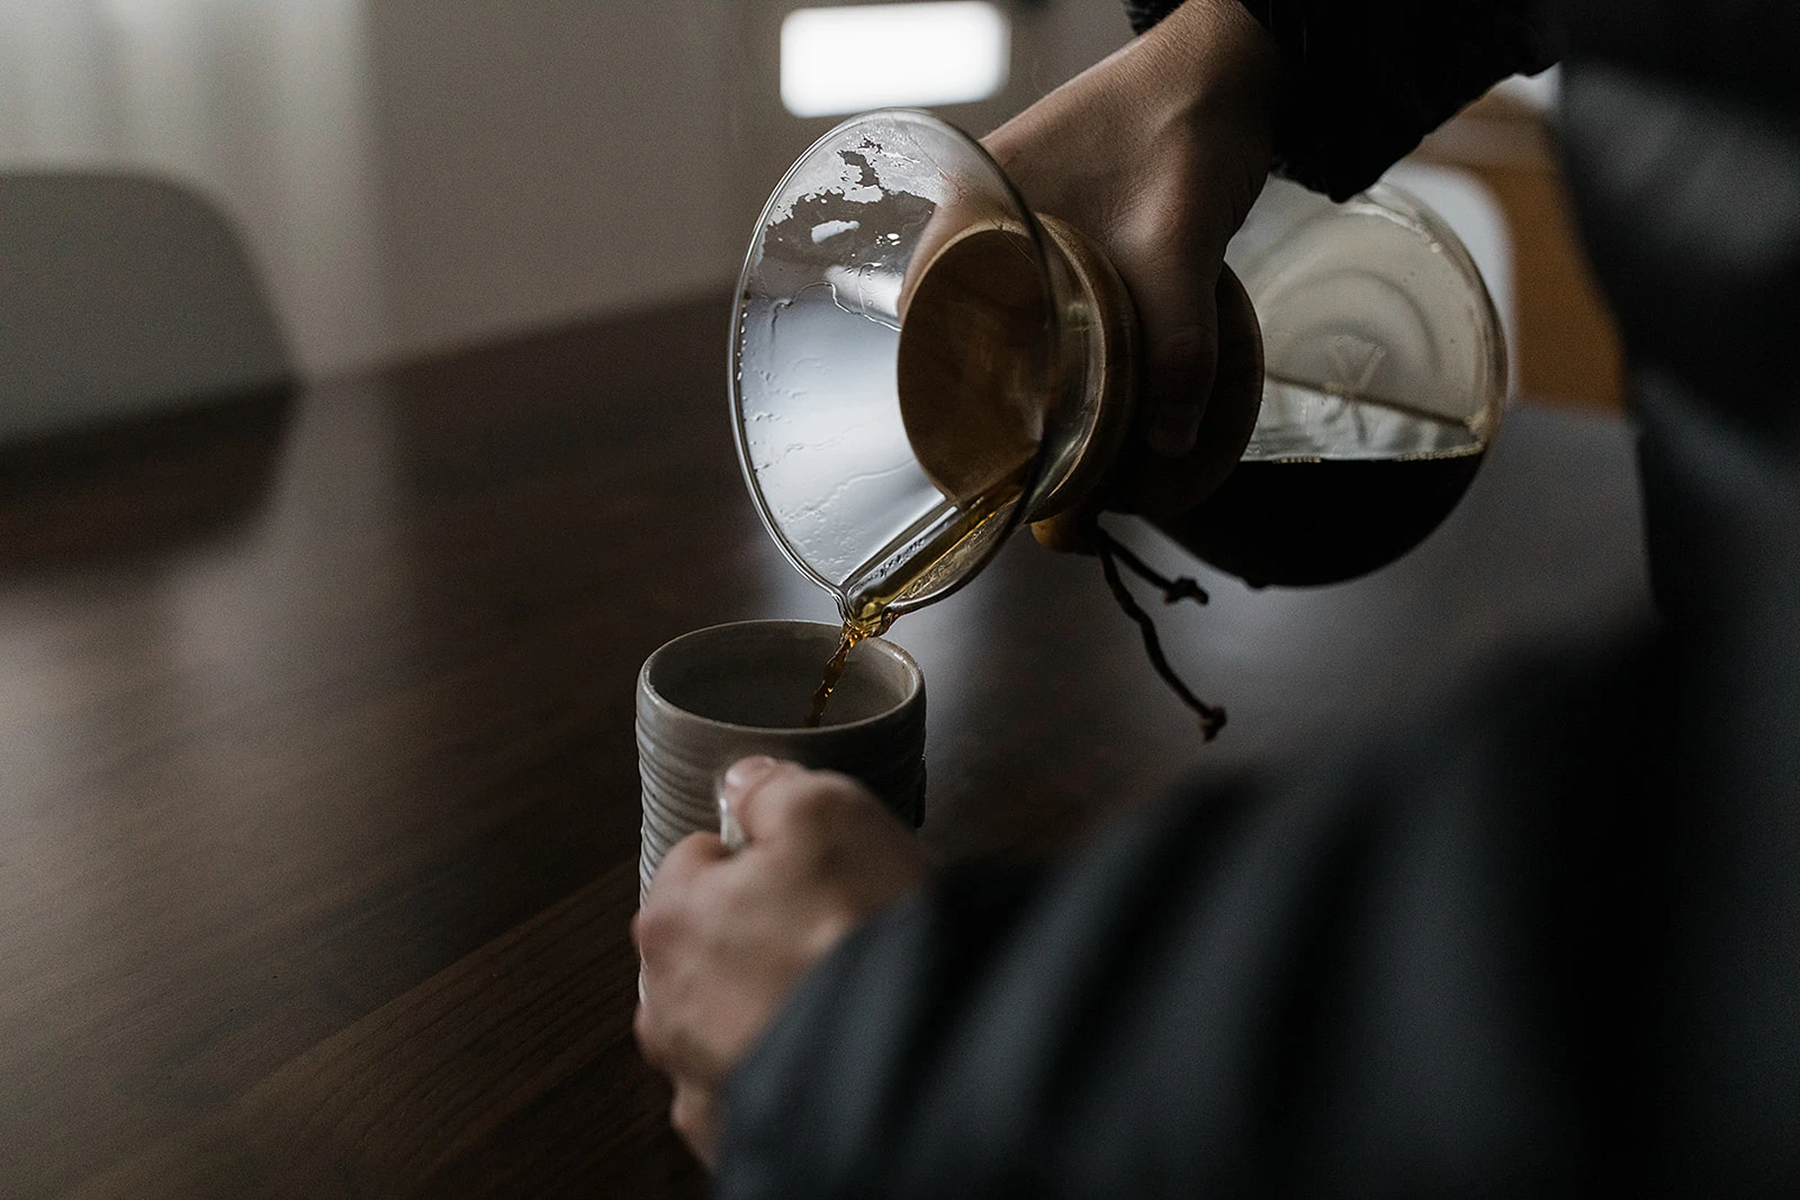 Six Essential Elements of Good Coffee Brewing